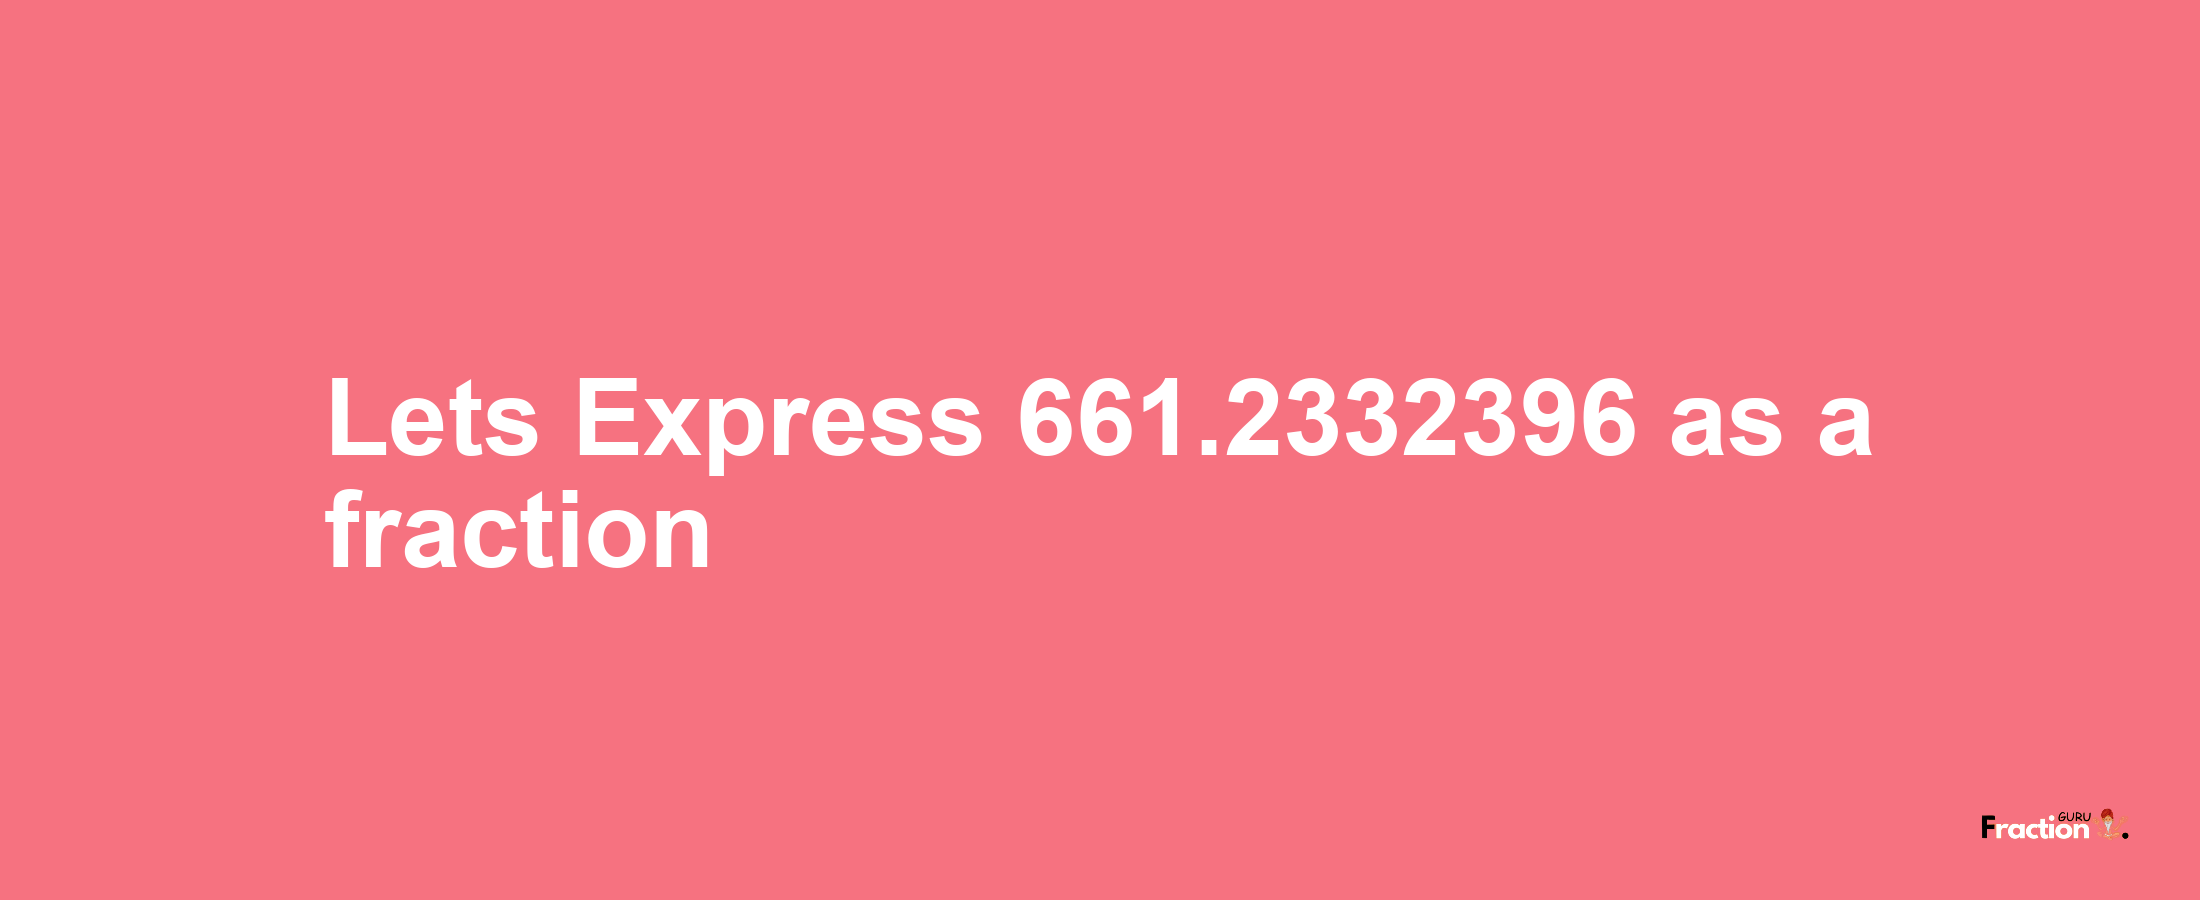 Lets Express 661.2332396 as afraction